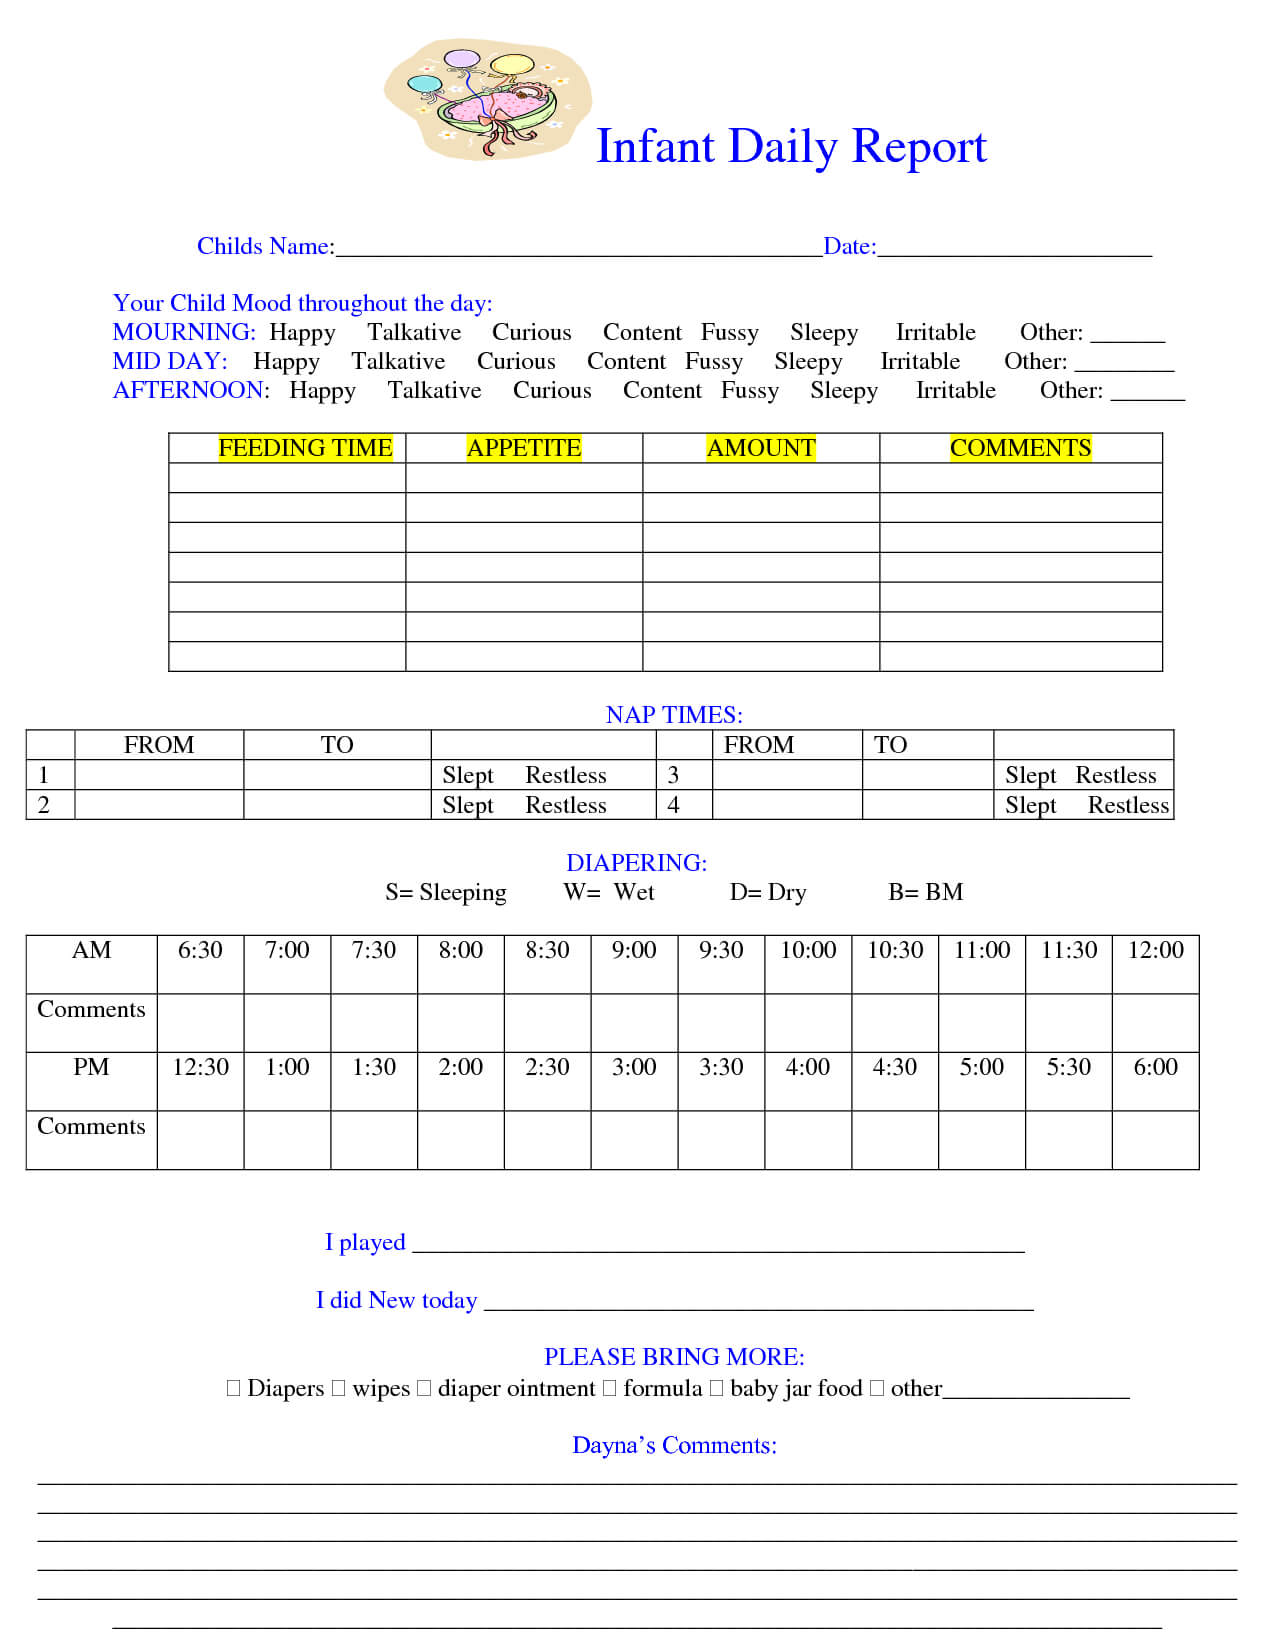 free infant daycare daily schedule template